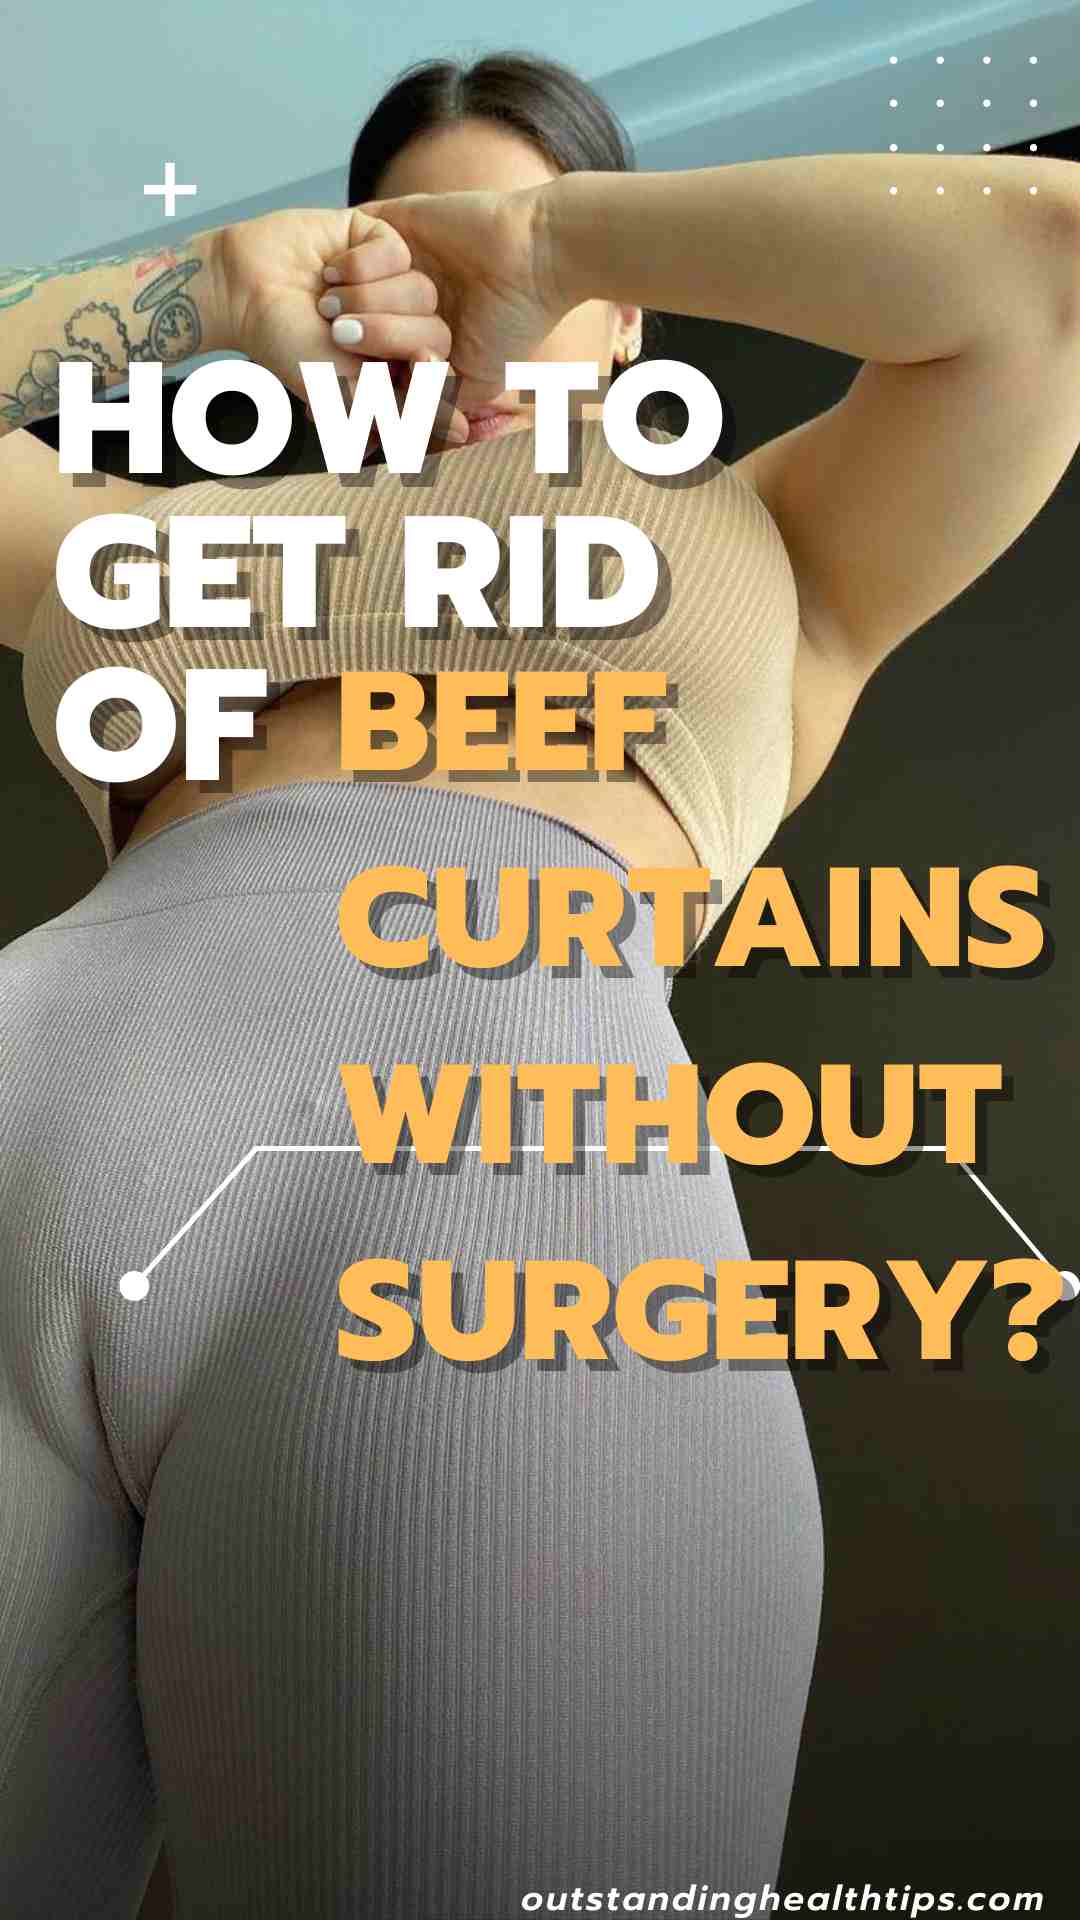 How to Get Rid of Beef Curtains Without Surgery?